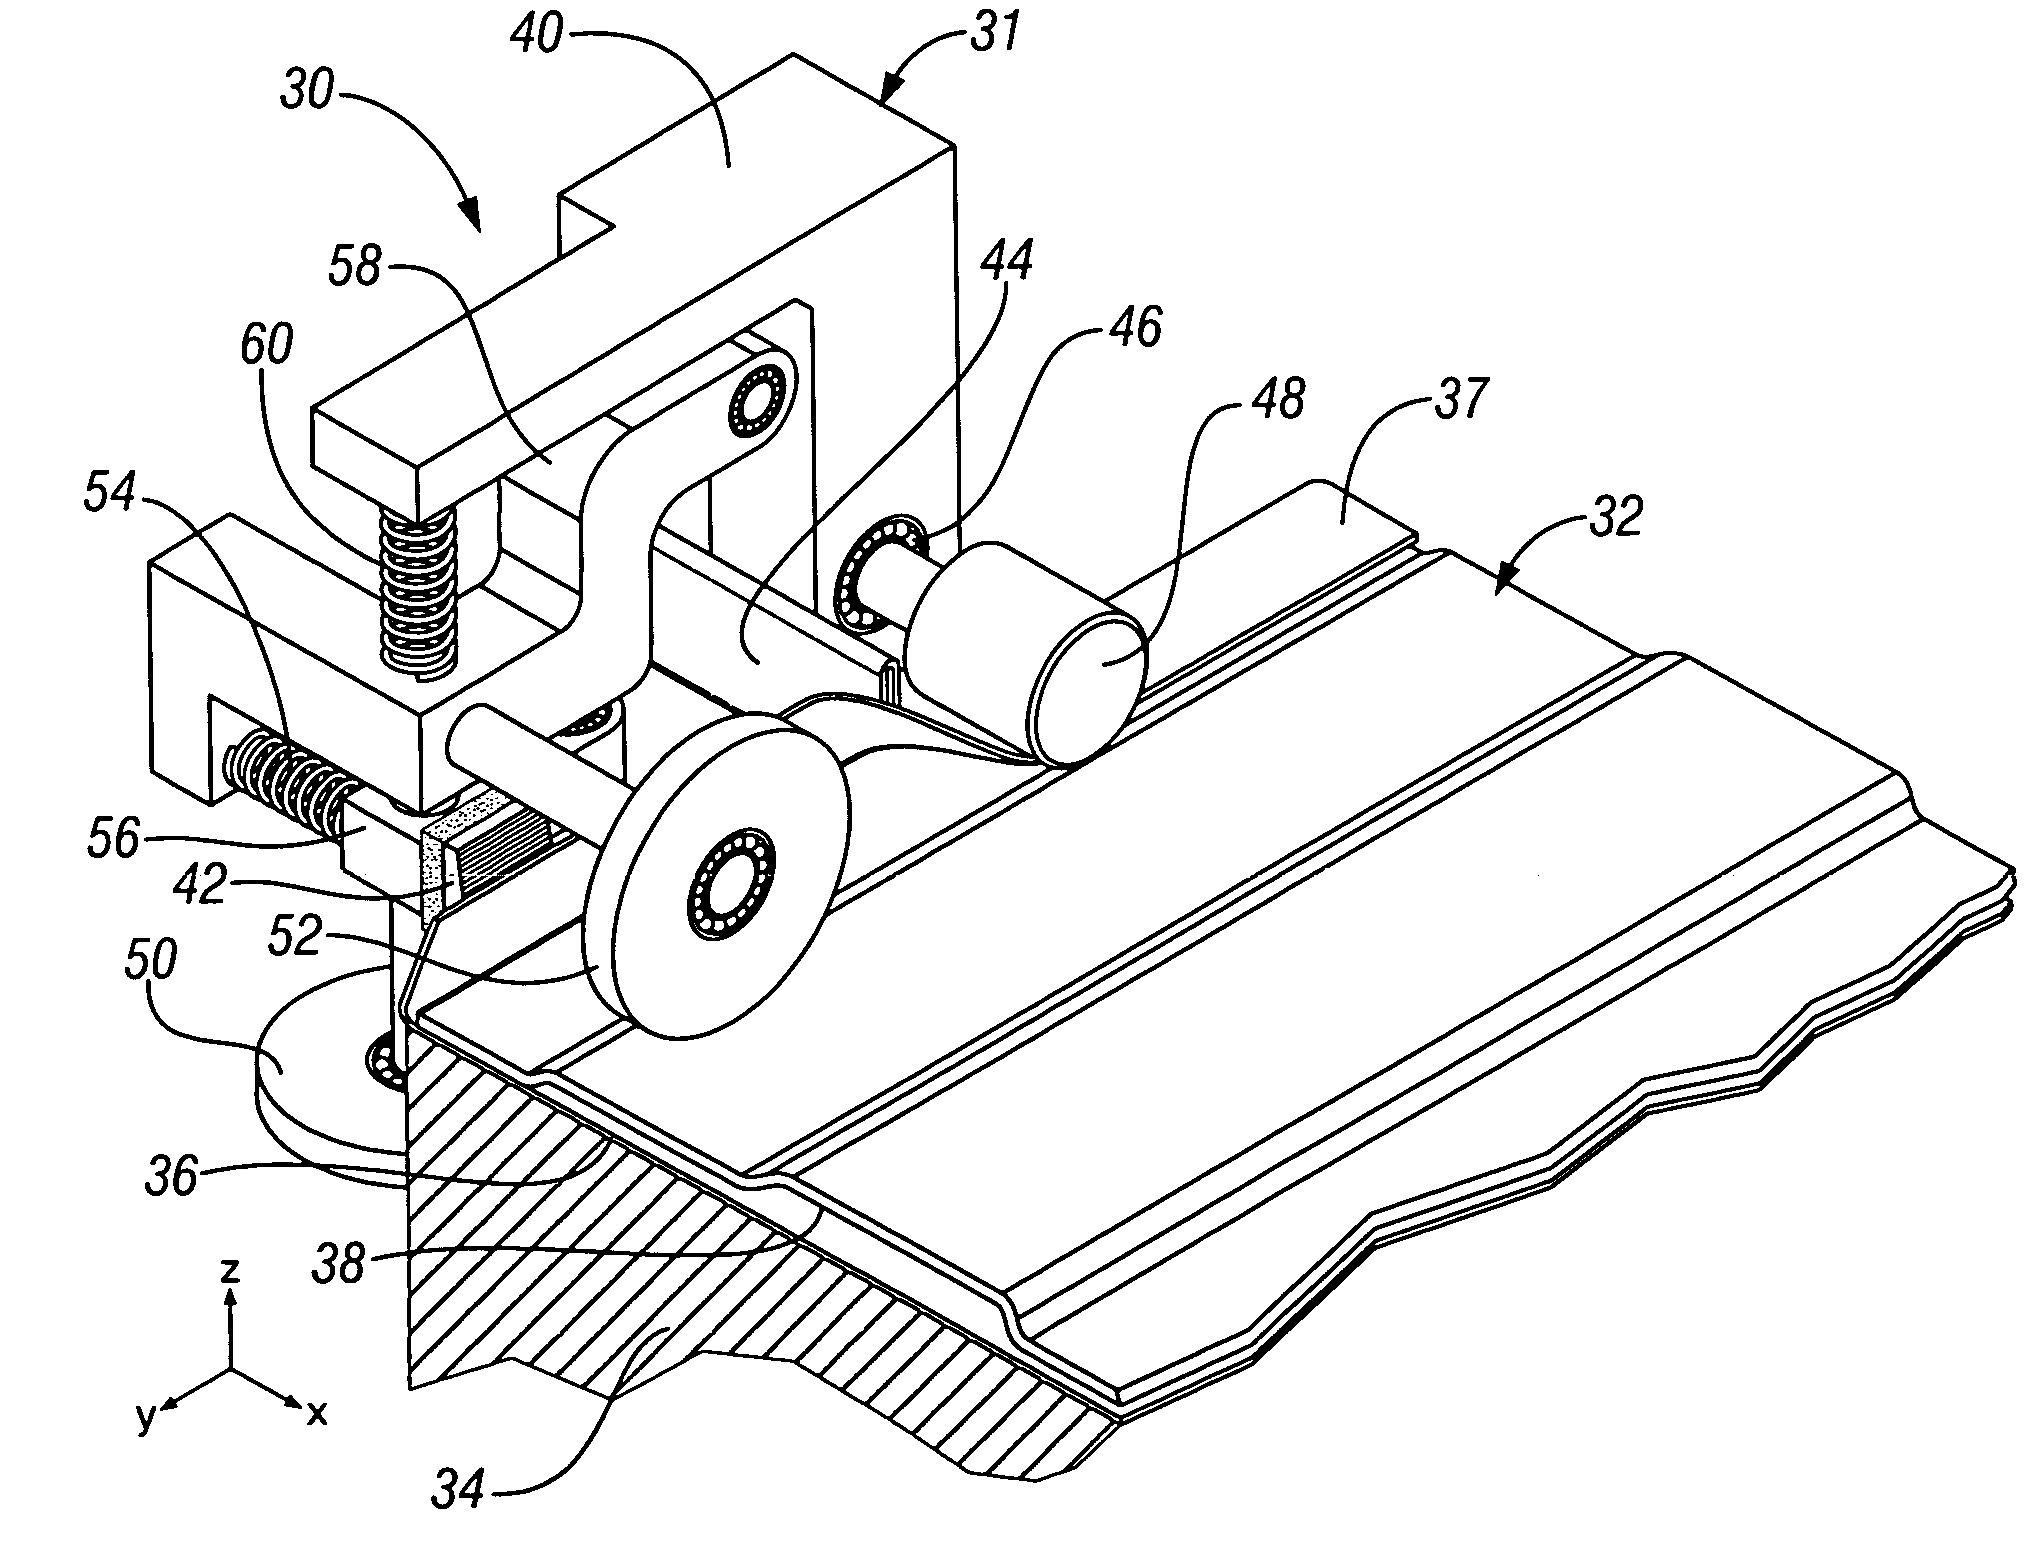 Roller hemming apparatus and method